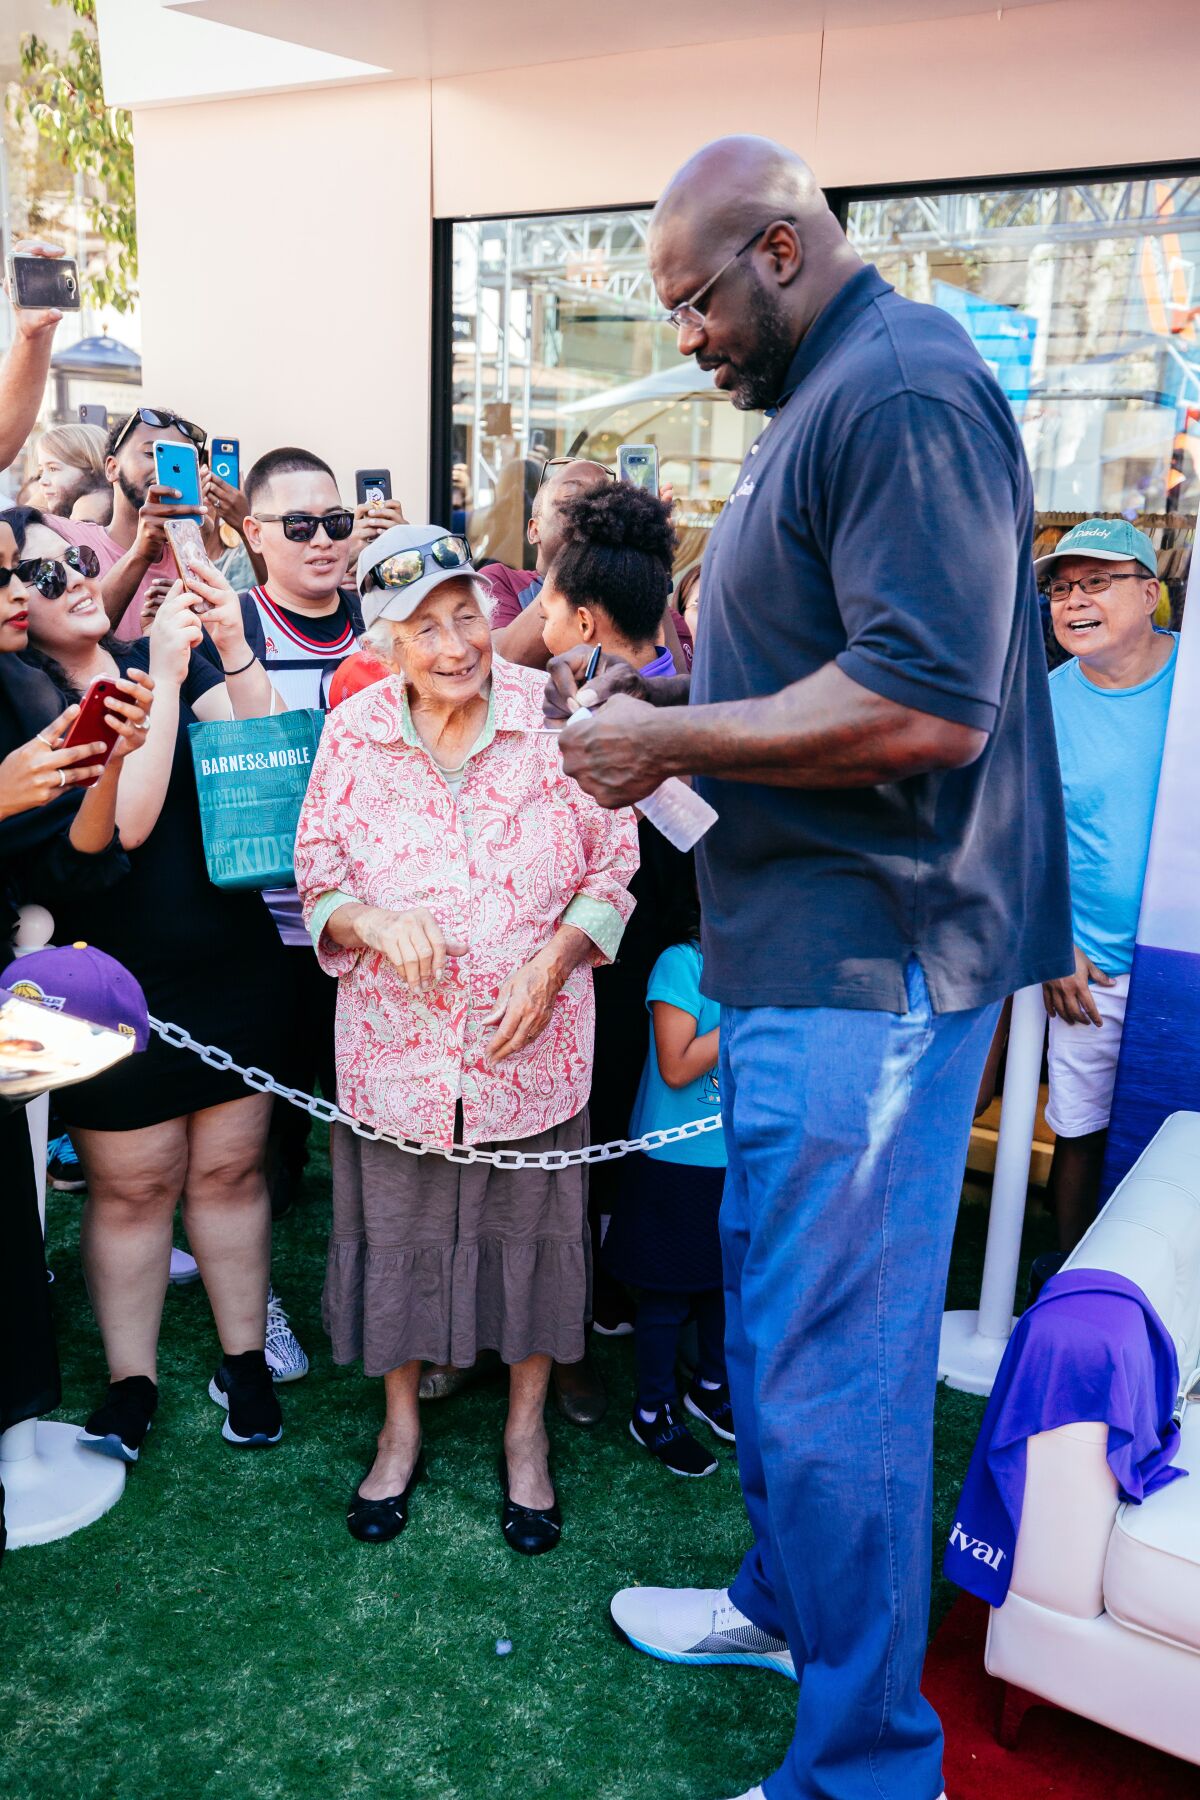 Carnival Cruises' chief fun officer Shaquille O'Neal greets fans last year at an event at the Grove celebrating the arrival of the Carnival Panorama ship.